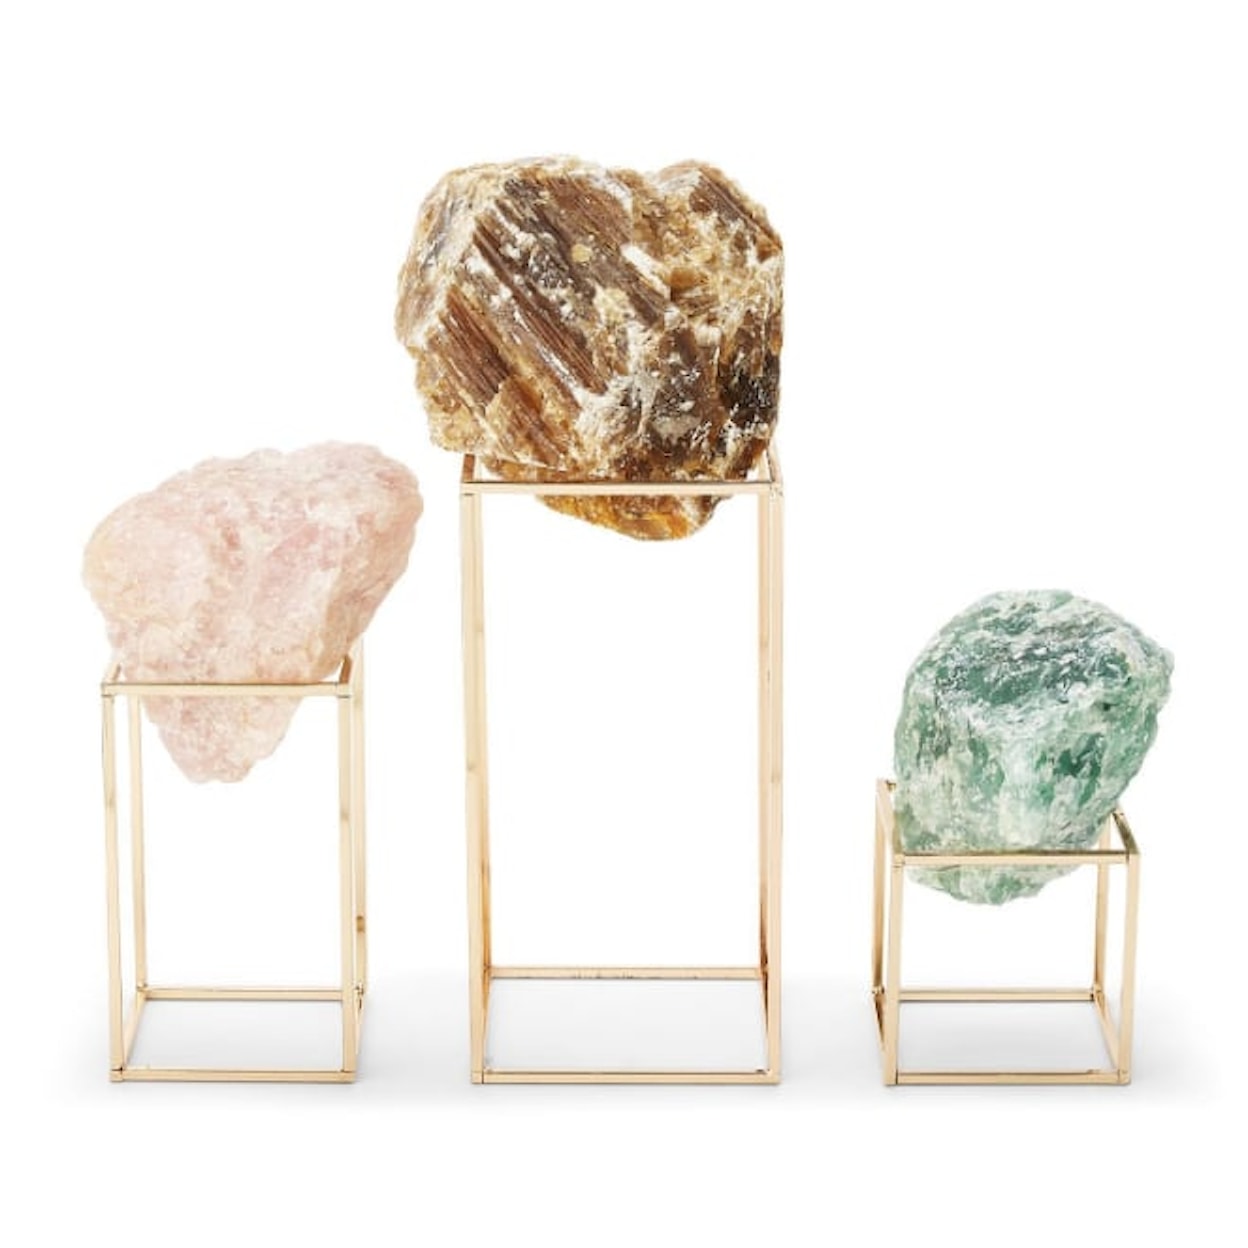 Two's Company Urban Nest S/3 Natural Stones on Metal Stand - 3 Colors